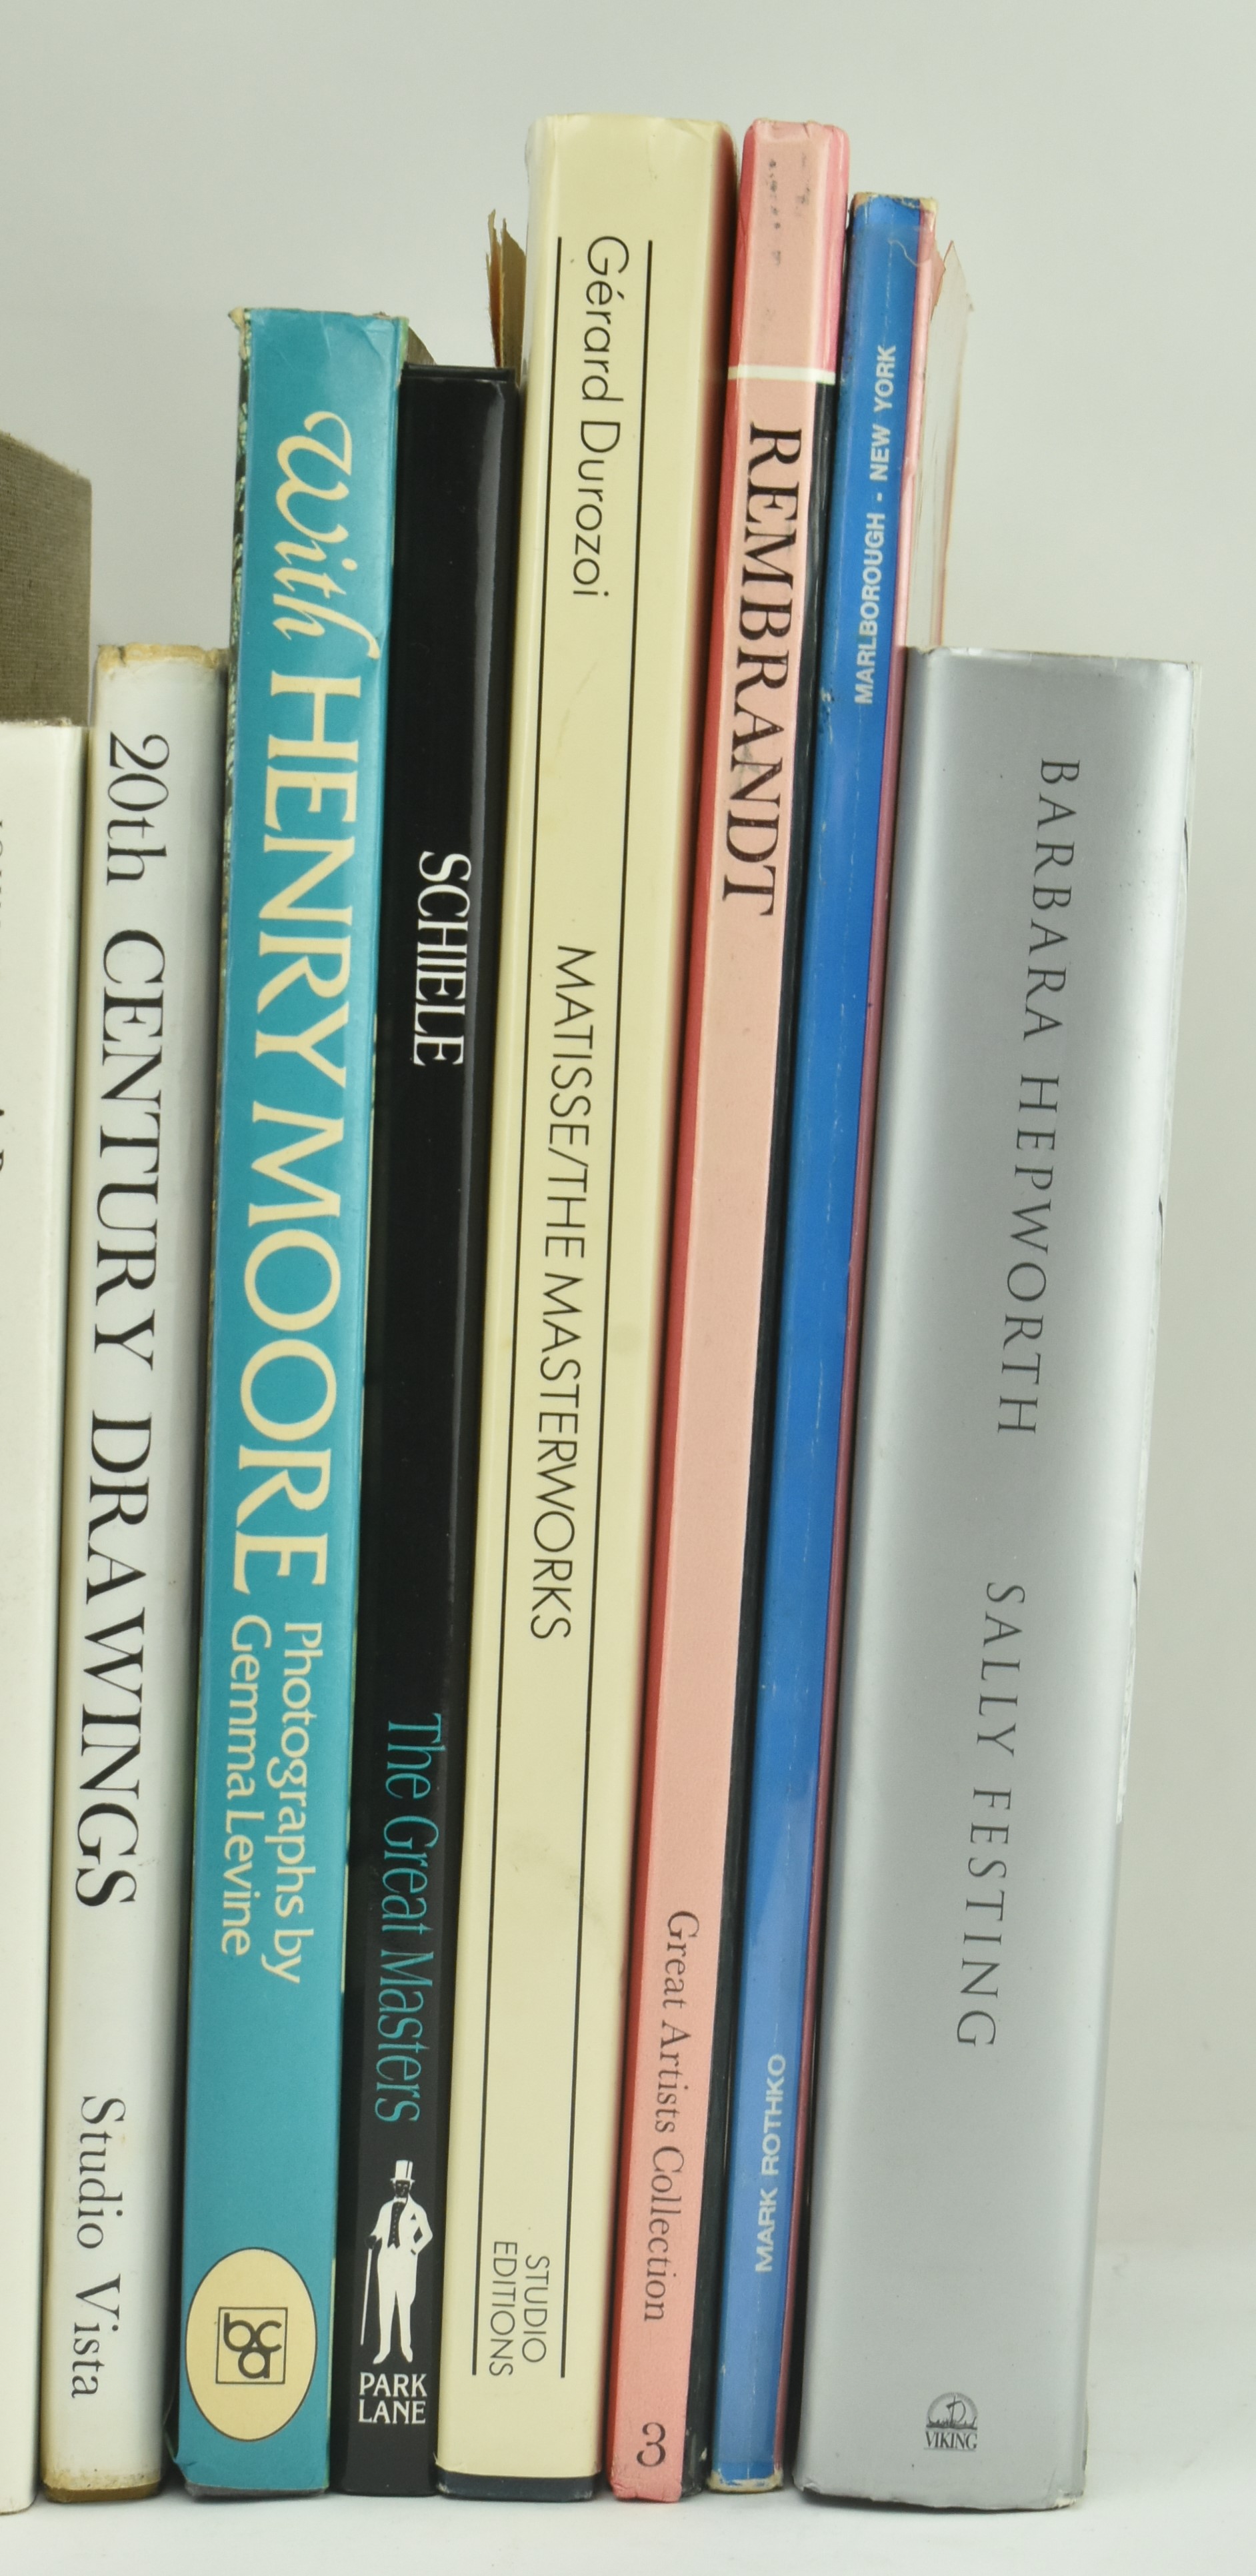 COLLECTION OF ART REFERENCE BOOKS & ARTIST BIOGRAPHIES - Image 4 of 10